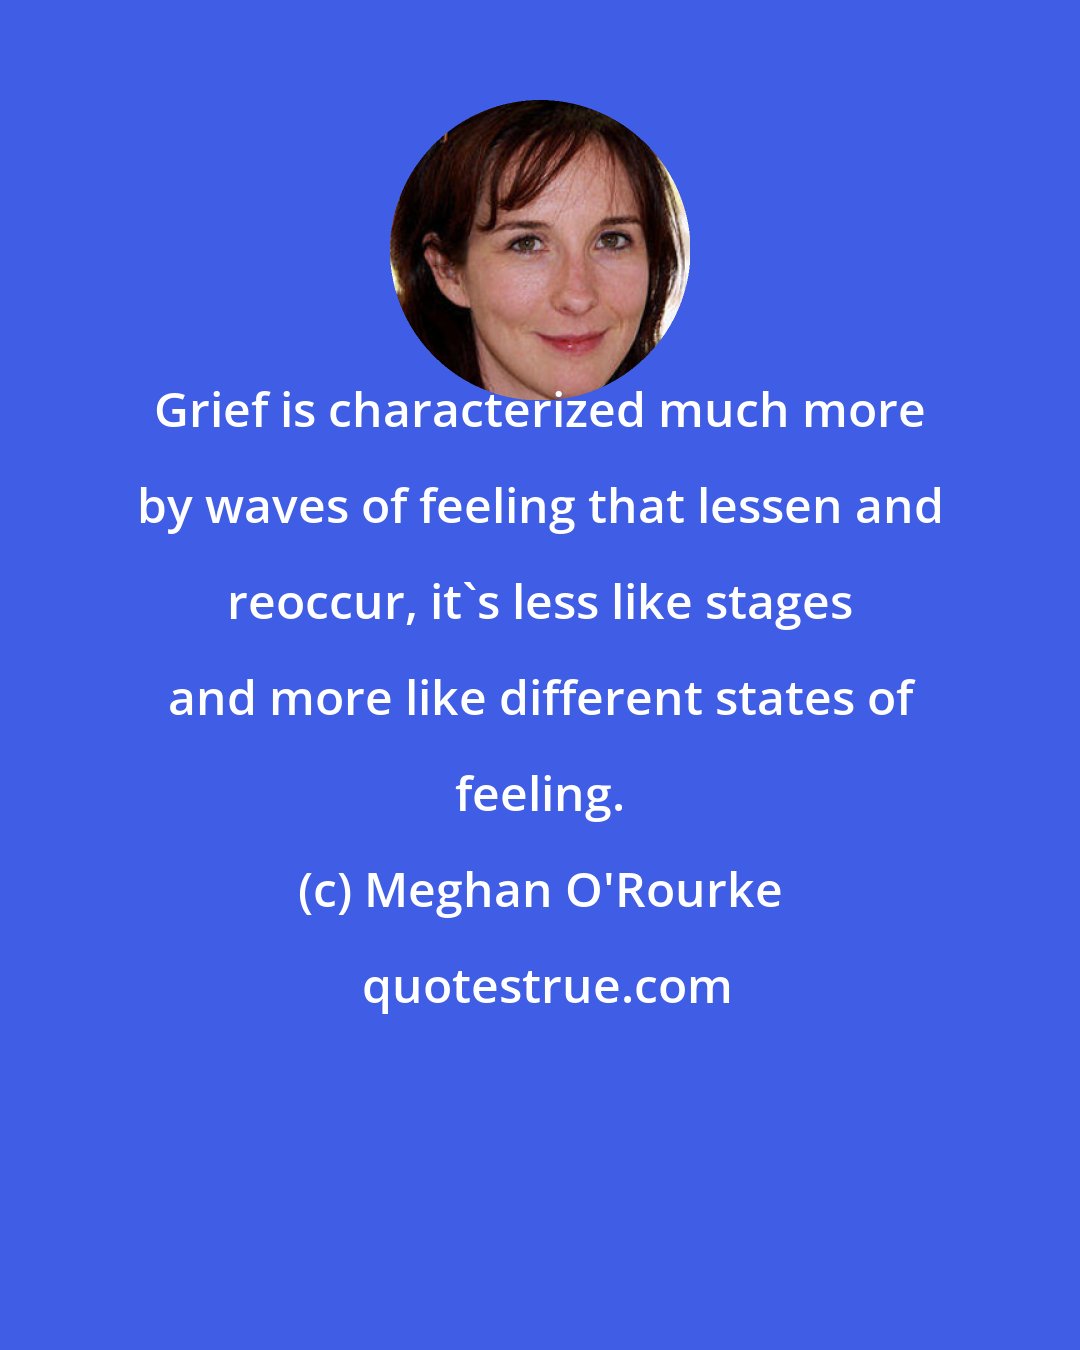 Meghan O'Rourke: Grief is characterized much more by waves of feeling that lessen and reoccur, it's less like stages and more like different states of feeling.